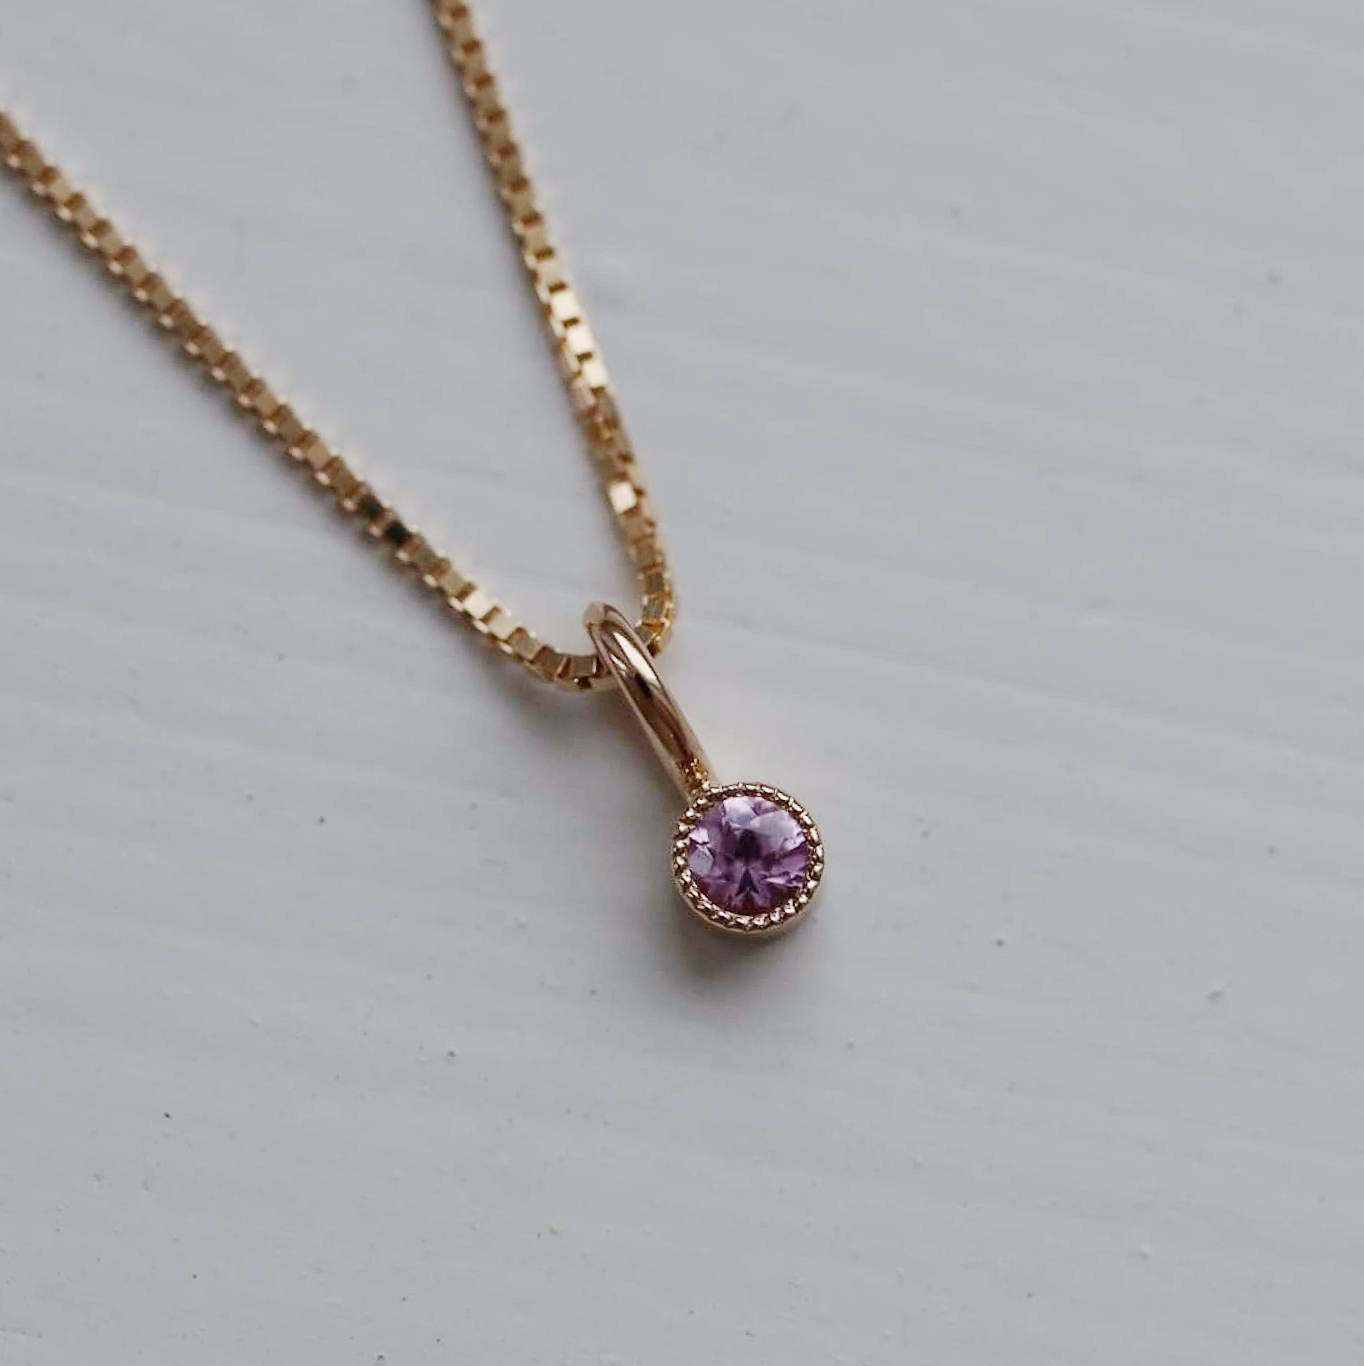 "Twinkle" pendant in gold with a light pink sapphire